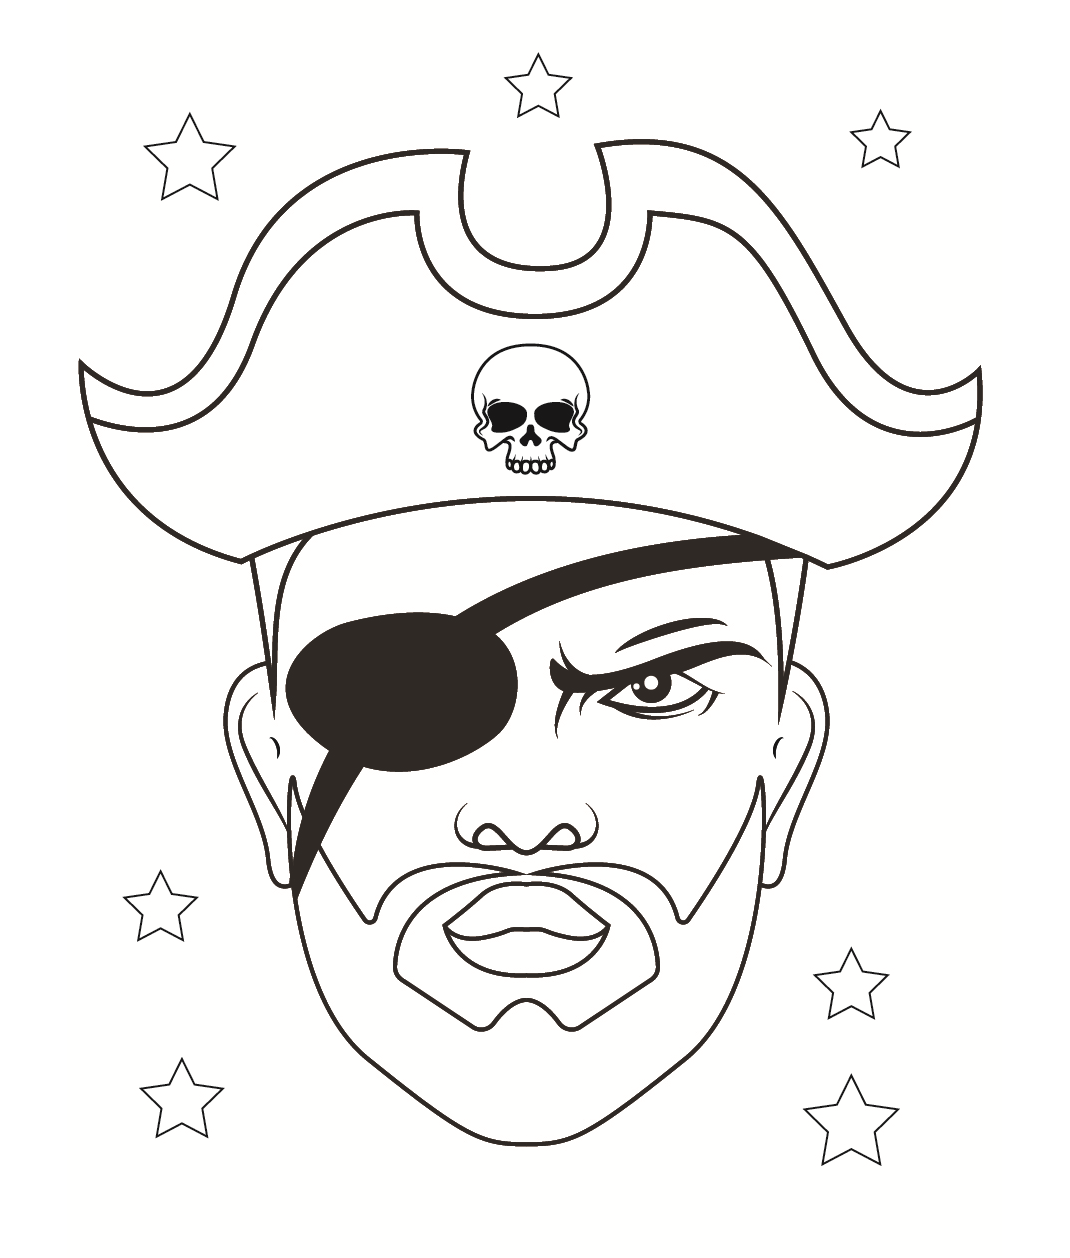 Pirate with one eye coloring sheet - SheetalColor.com